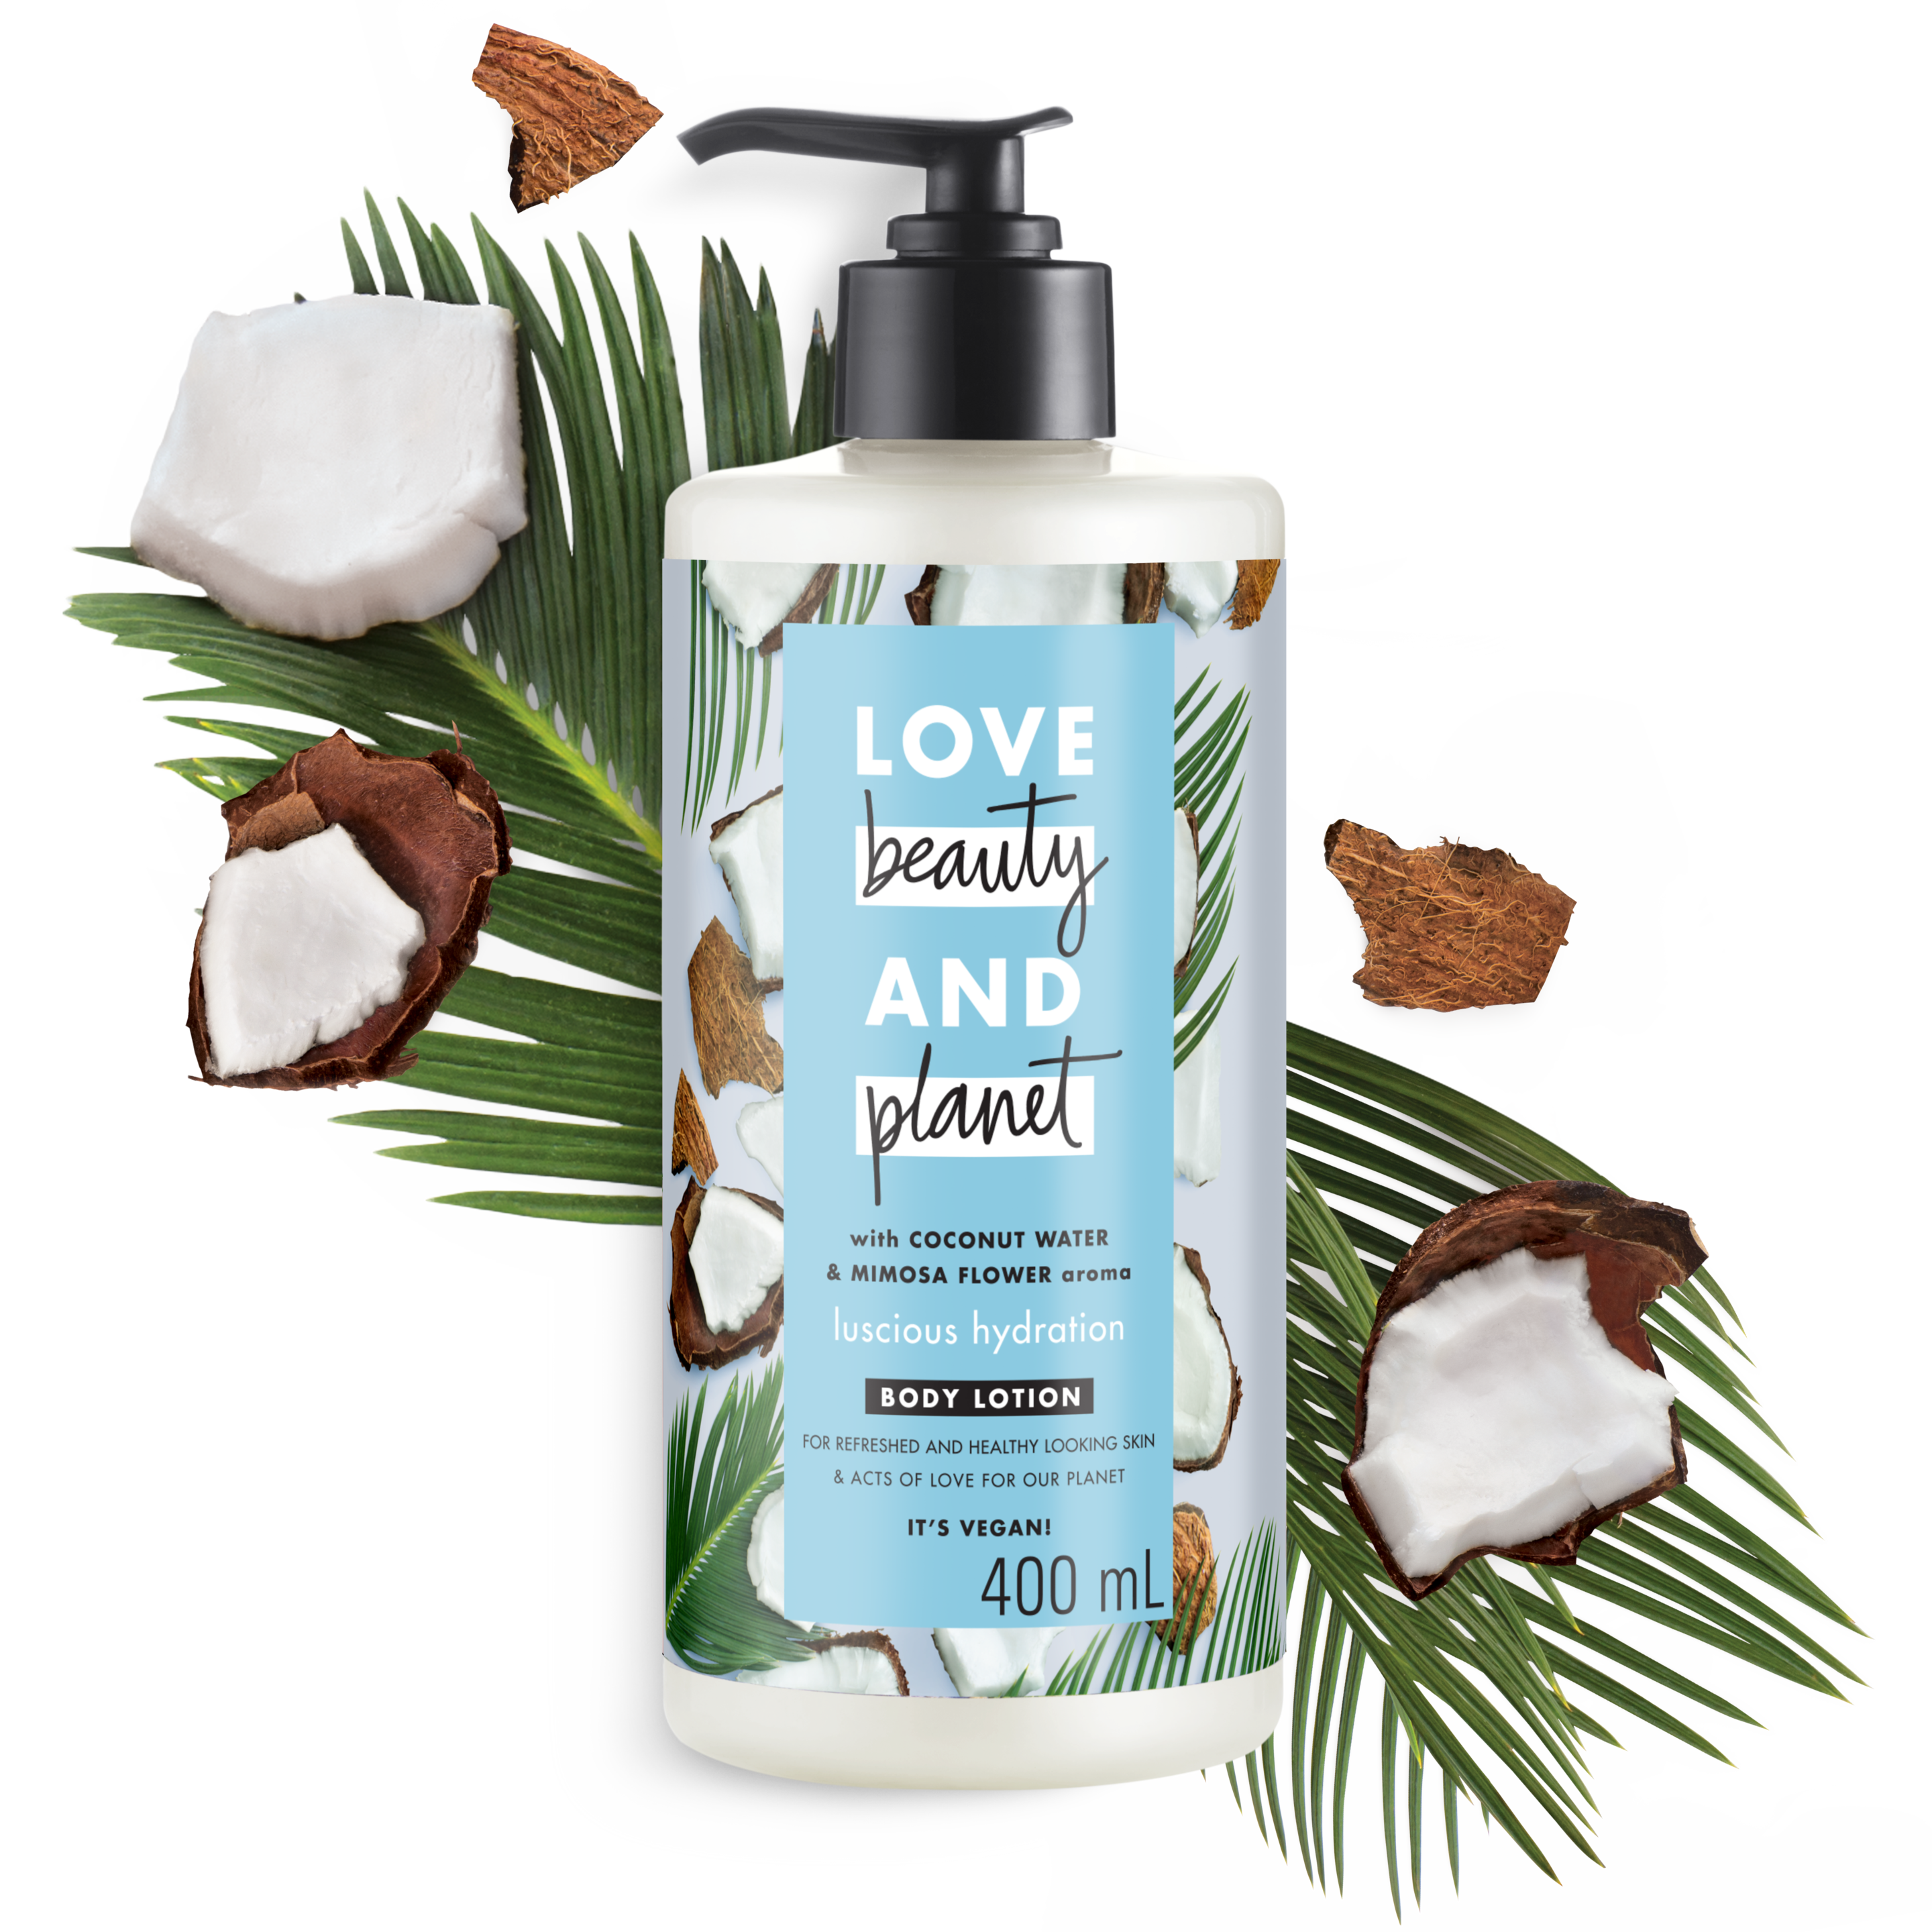 Coconut Water & Mimosa Flower Body Lotion Text